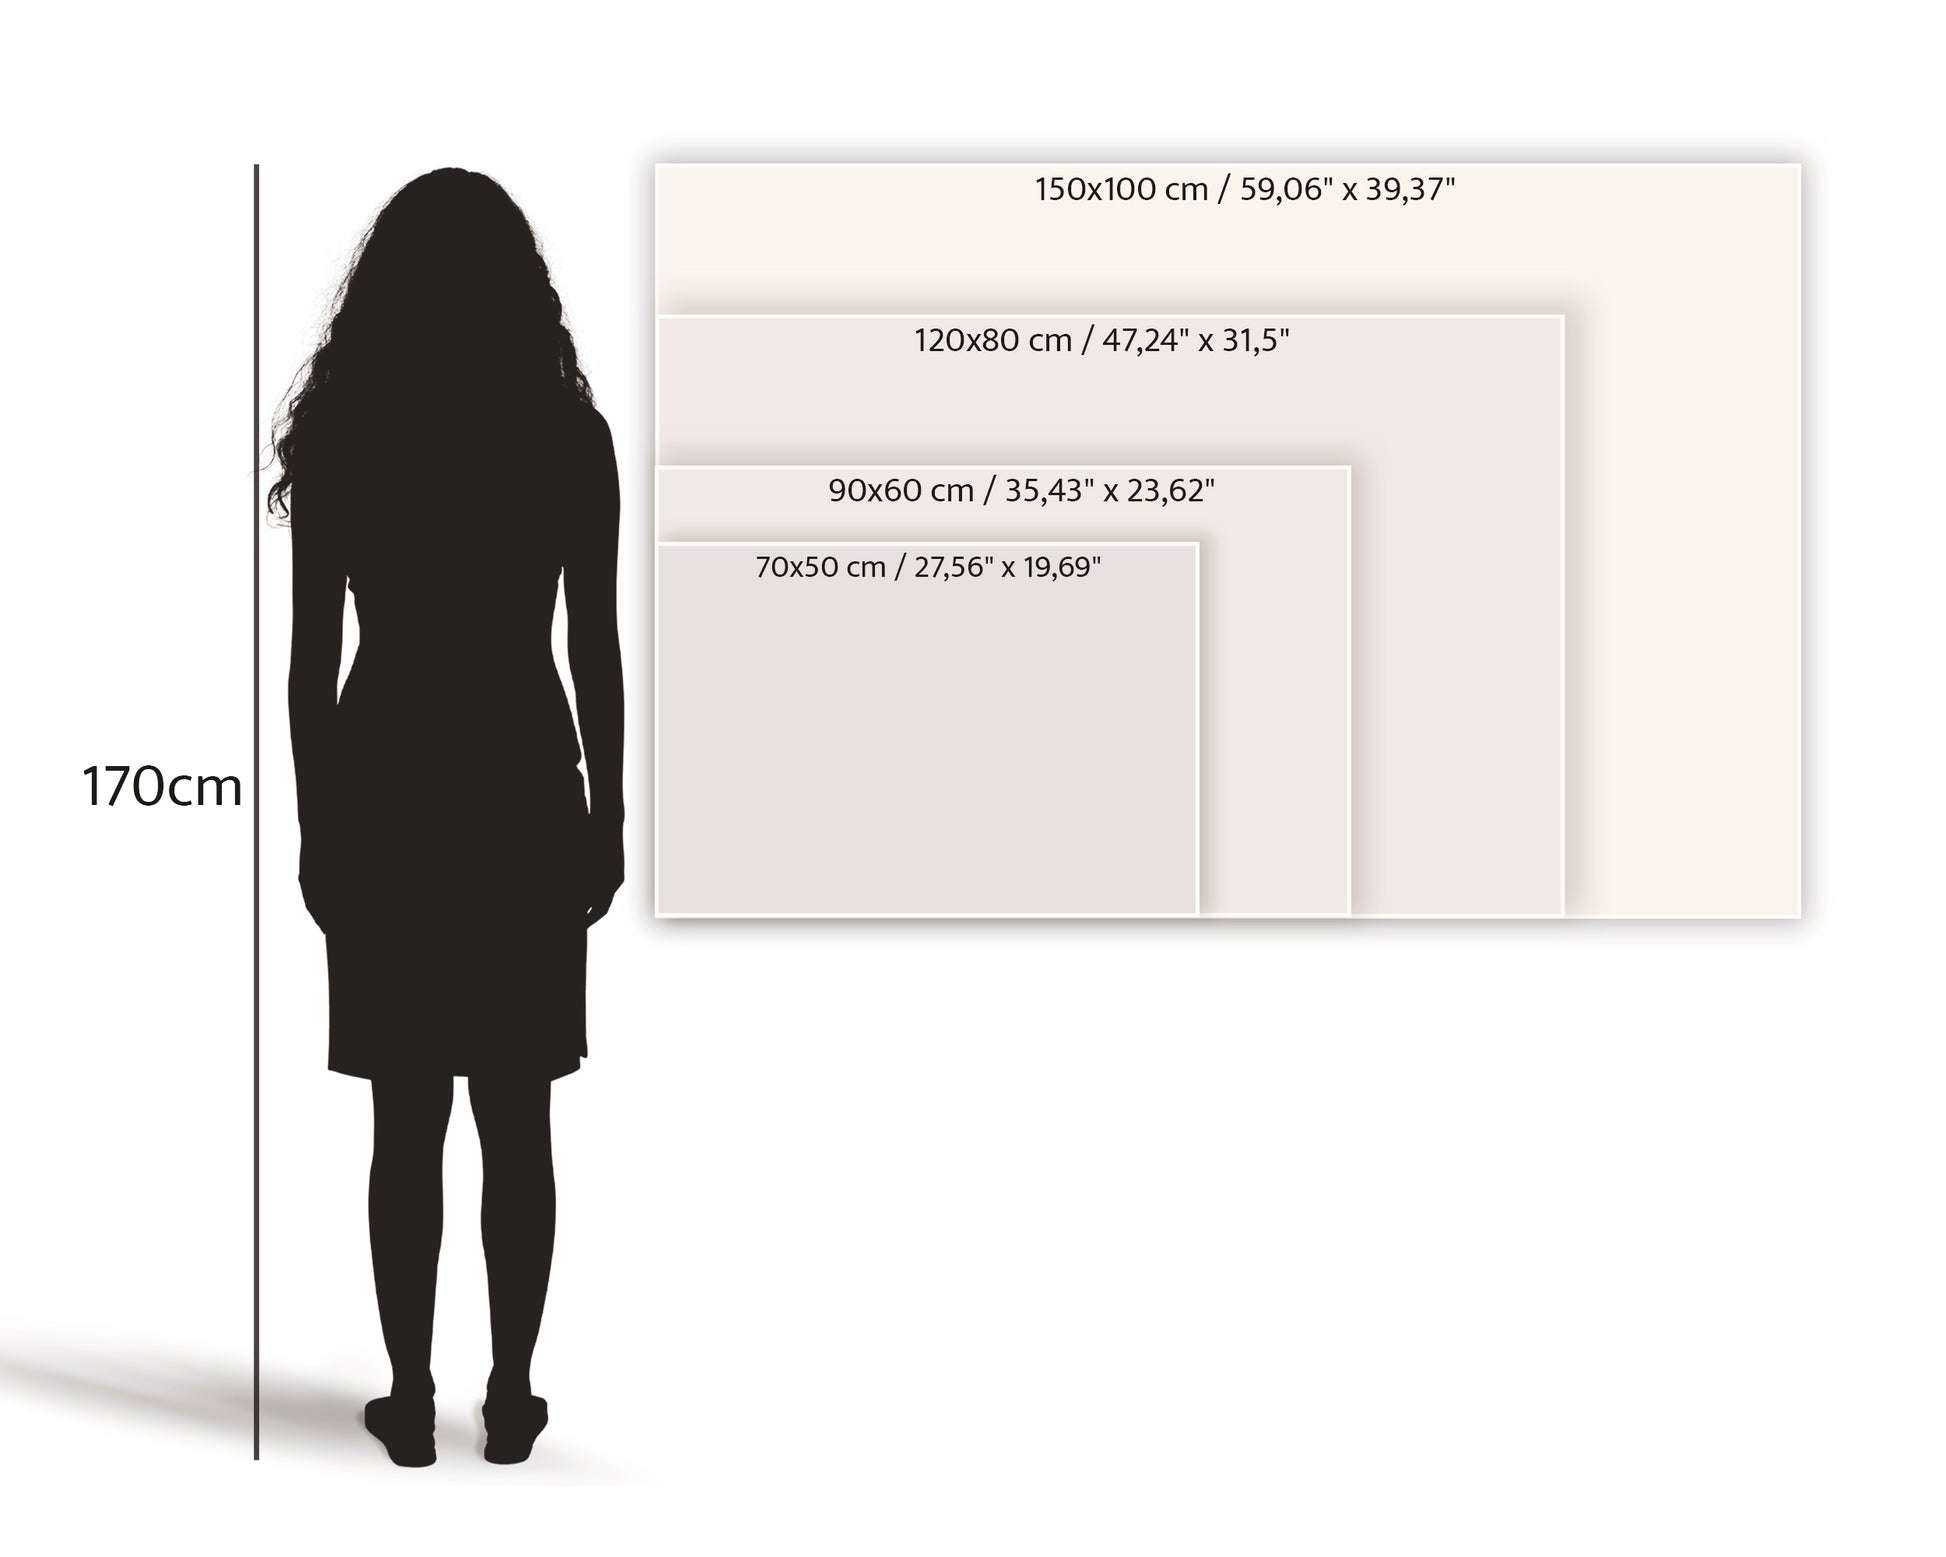 Silhouette of a woman standing next to a size comparison chart showing four different canvas map dimensions in centimeters and inches.